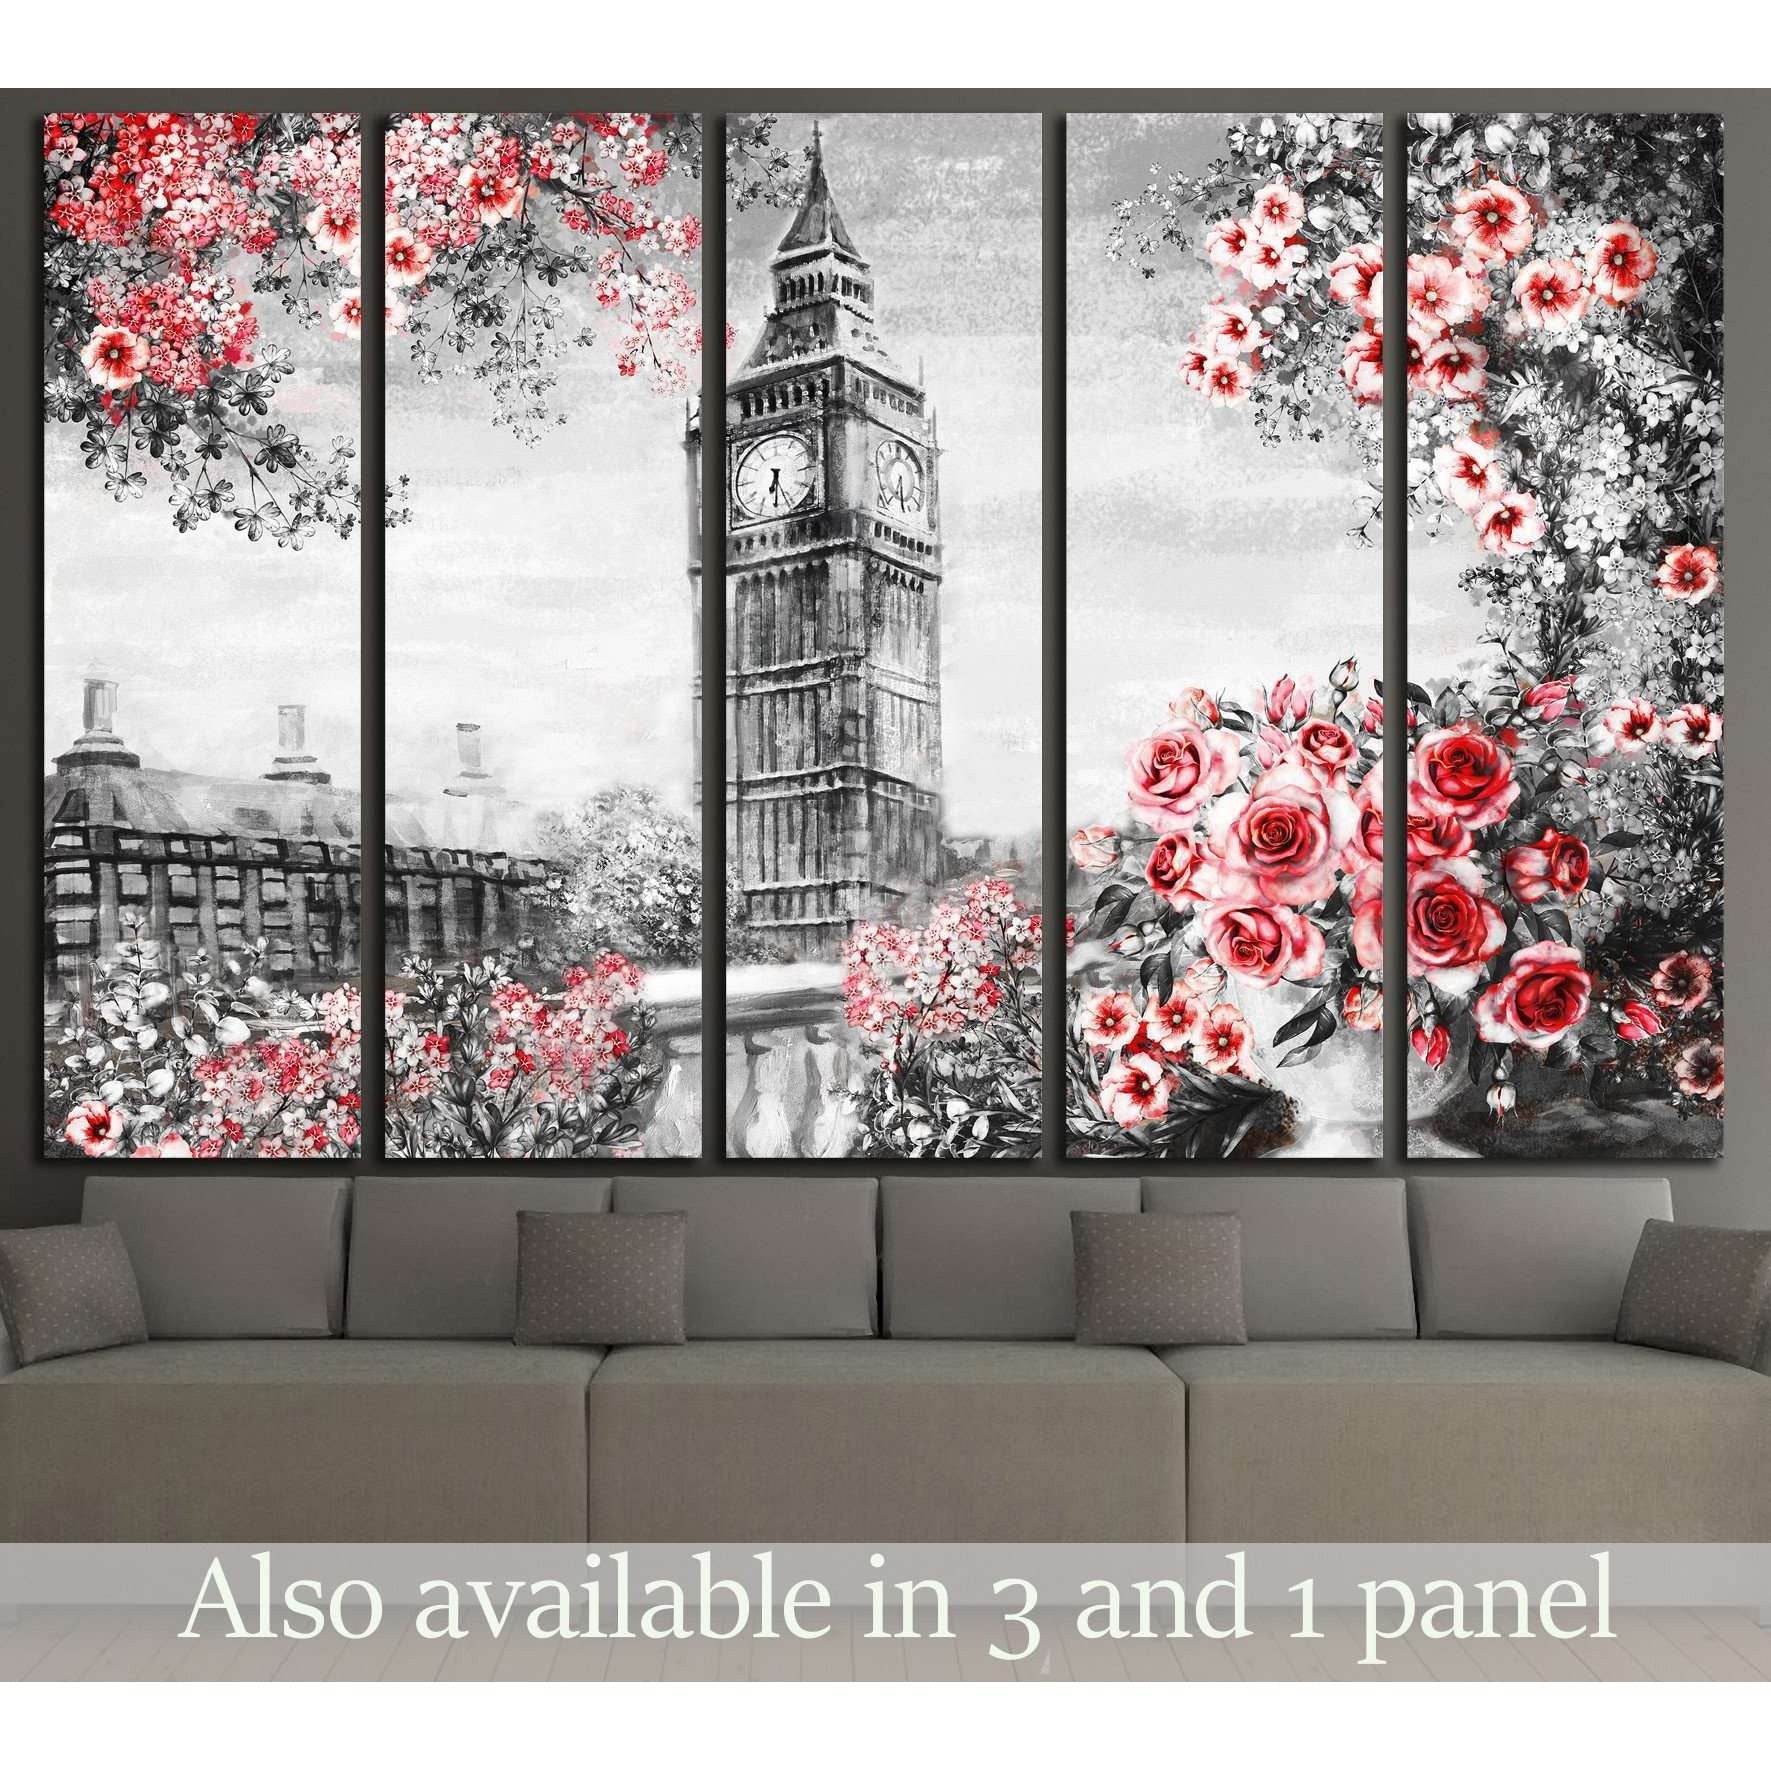 Oil Painting, summer in London, flower rose and leaf №2093 Ready to Hang Canvas Print